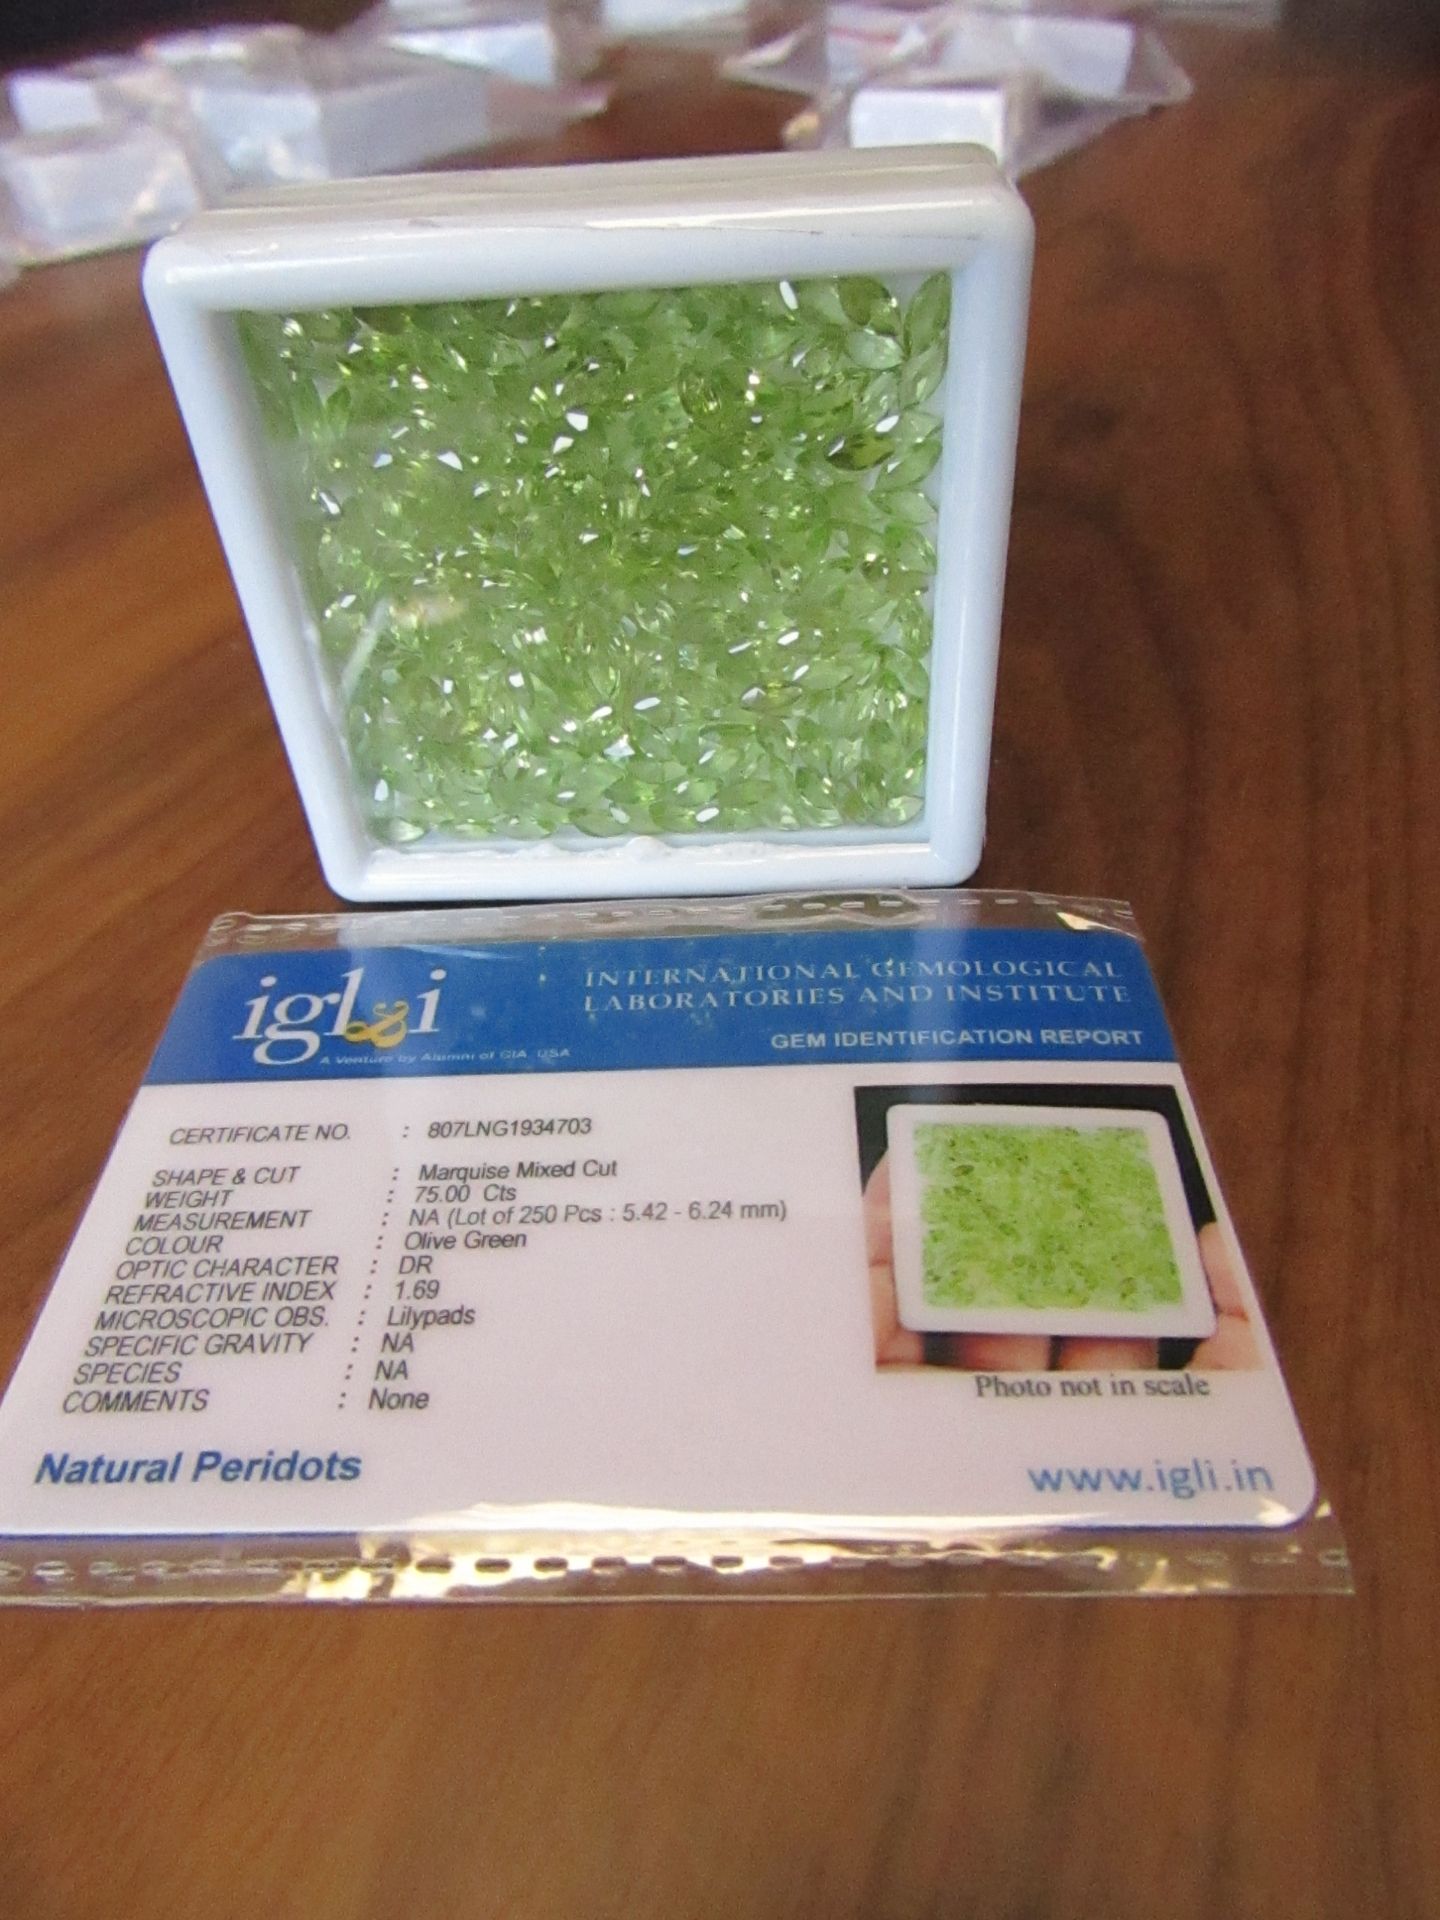 250 pieces Olive Green Natural Peridots. Marquise Mixed Cut. Total Weight 75.00 Carats. As per Gem